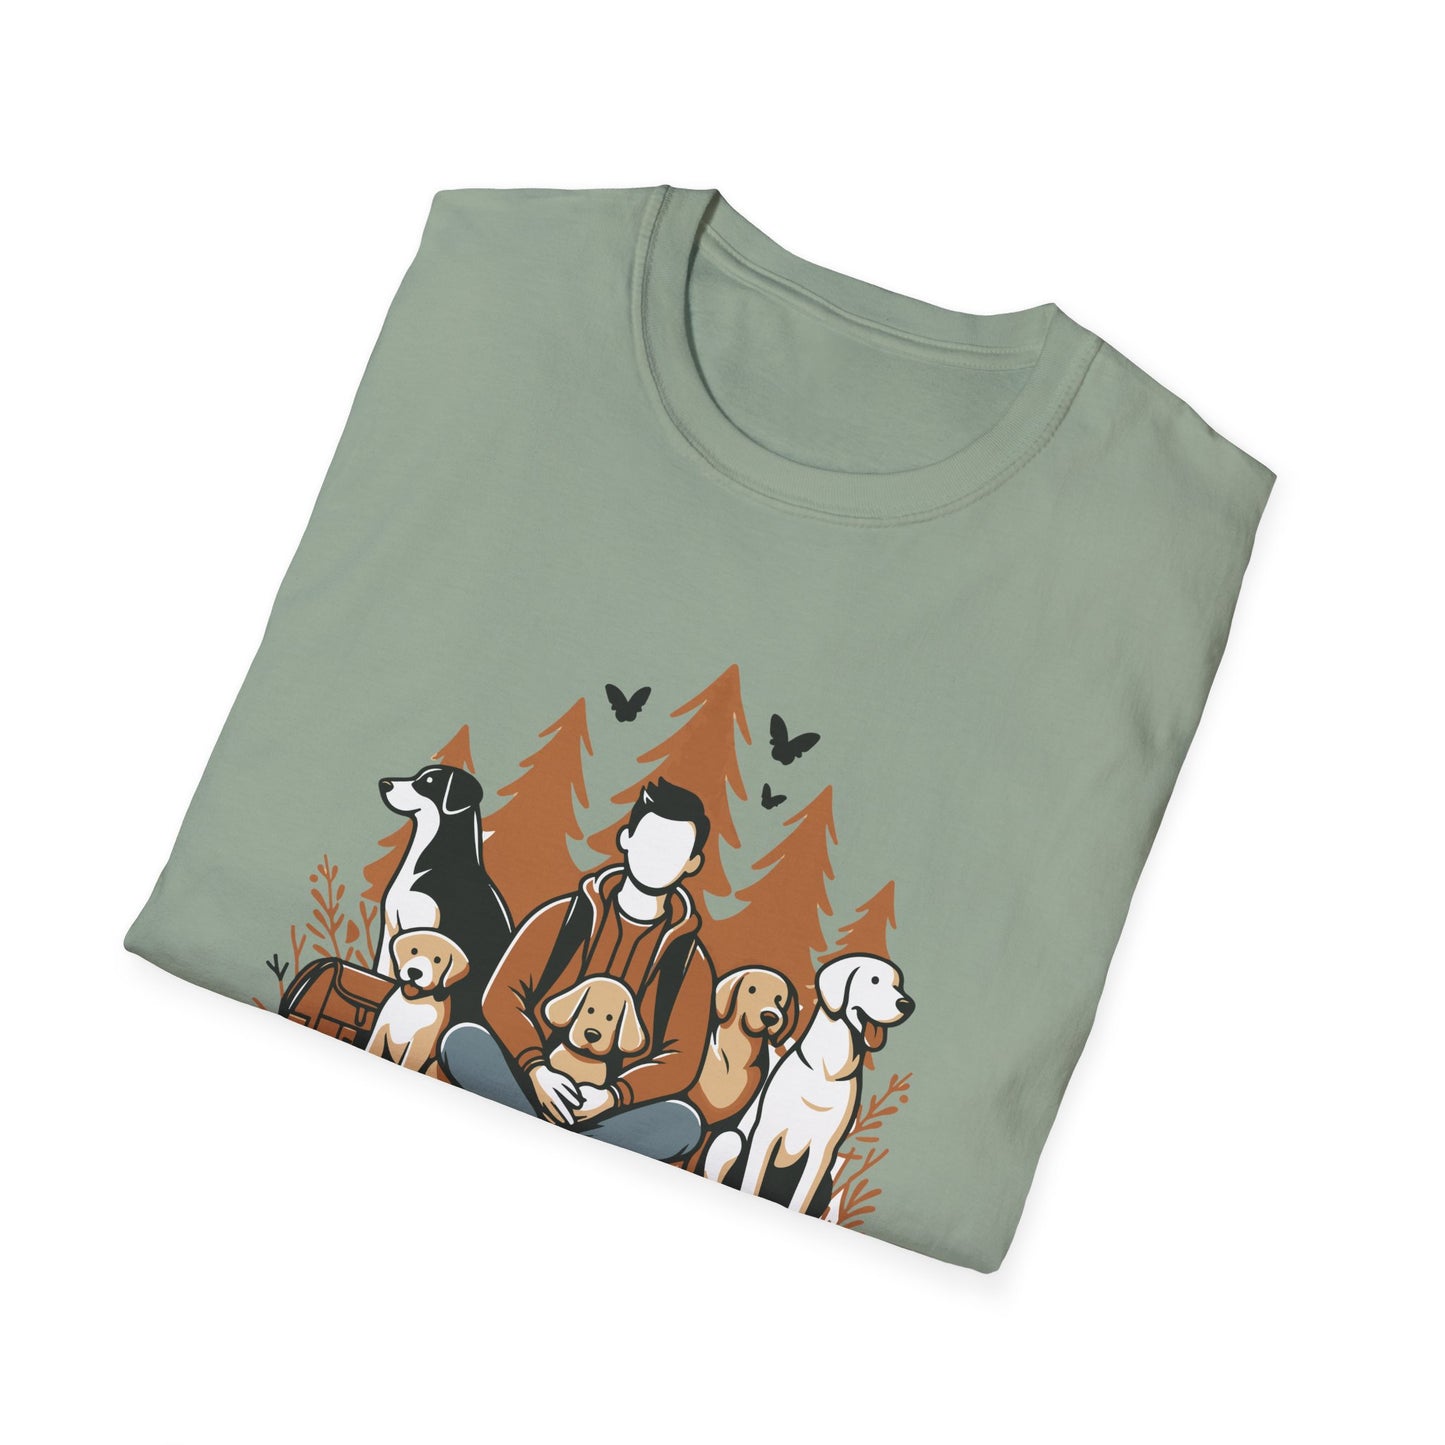 7 No Dogs Left Behind - Unisex Softstyle T-Shirt